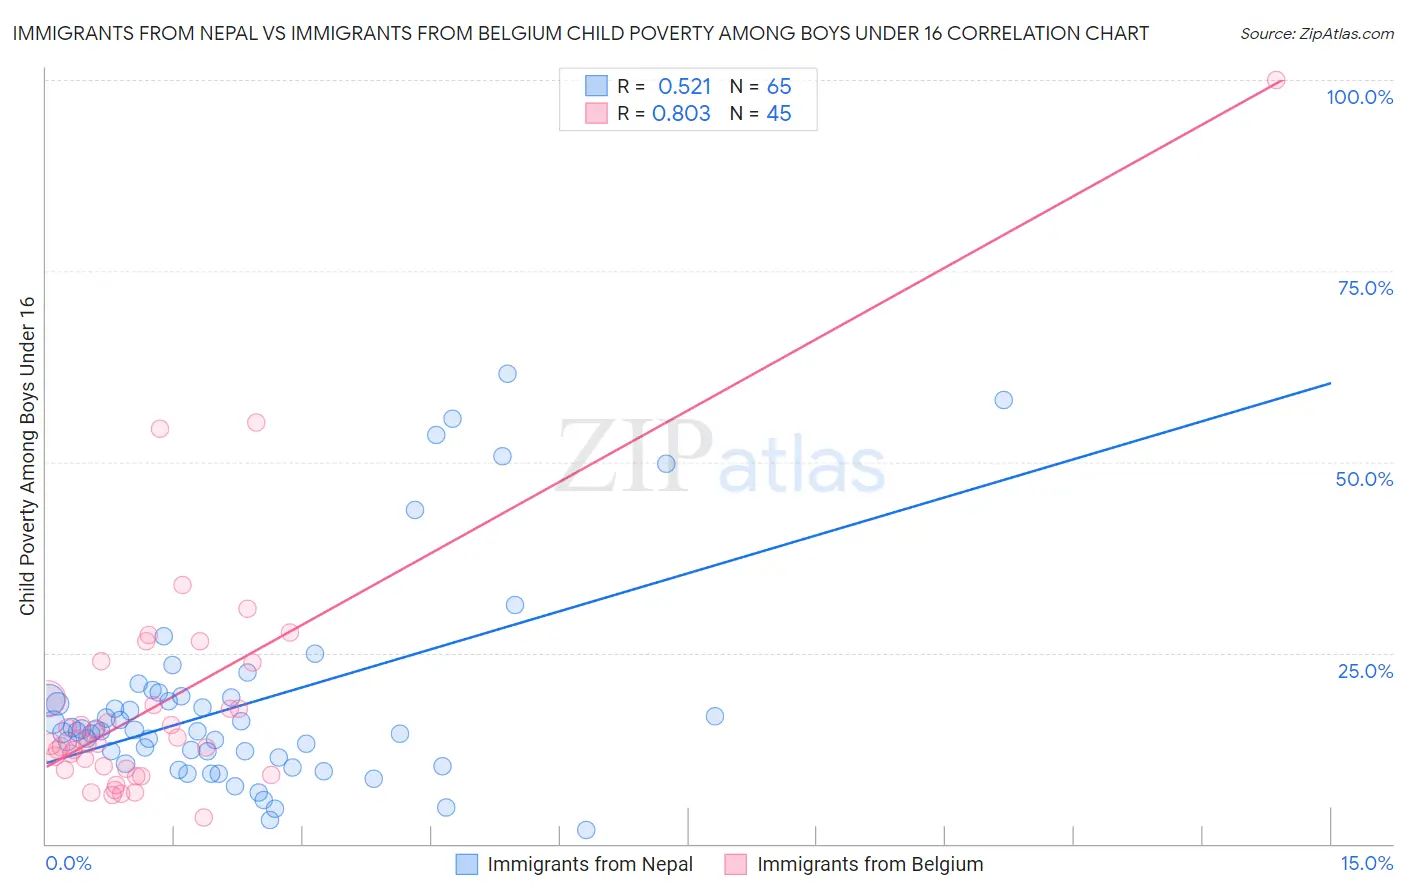 Immigrants from Nepal vs Immigrants from Belgium Child Poverty Among Boys Under 16